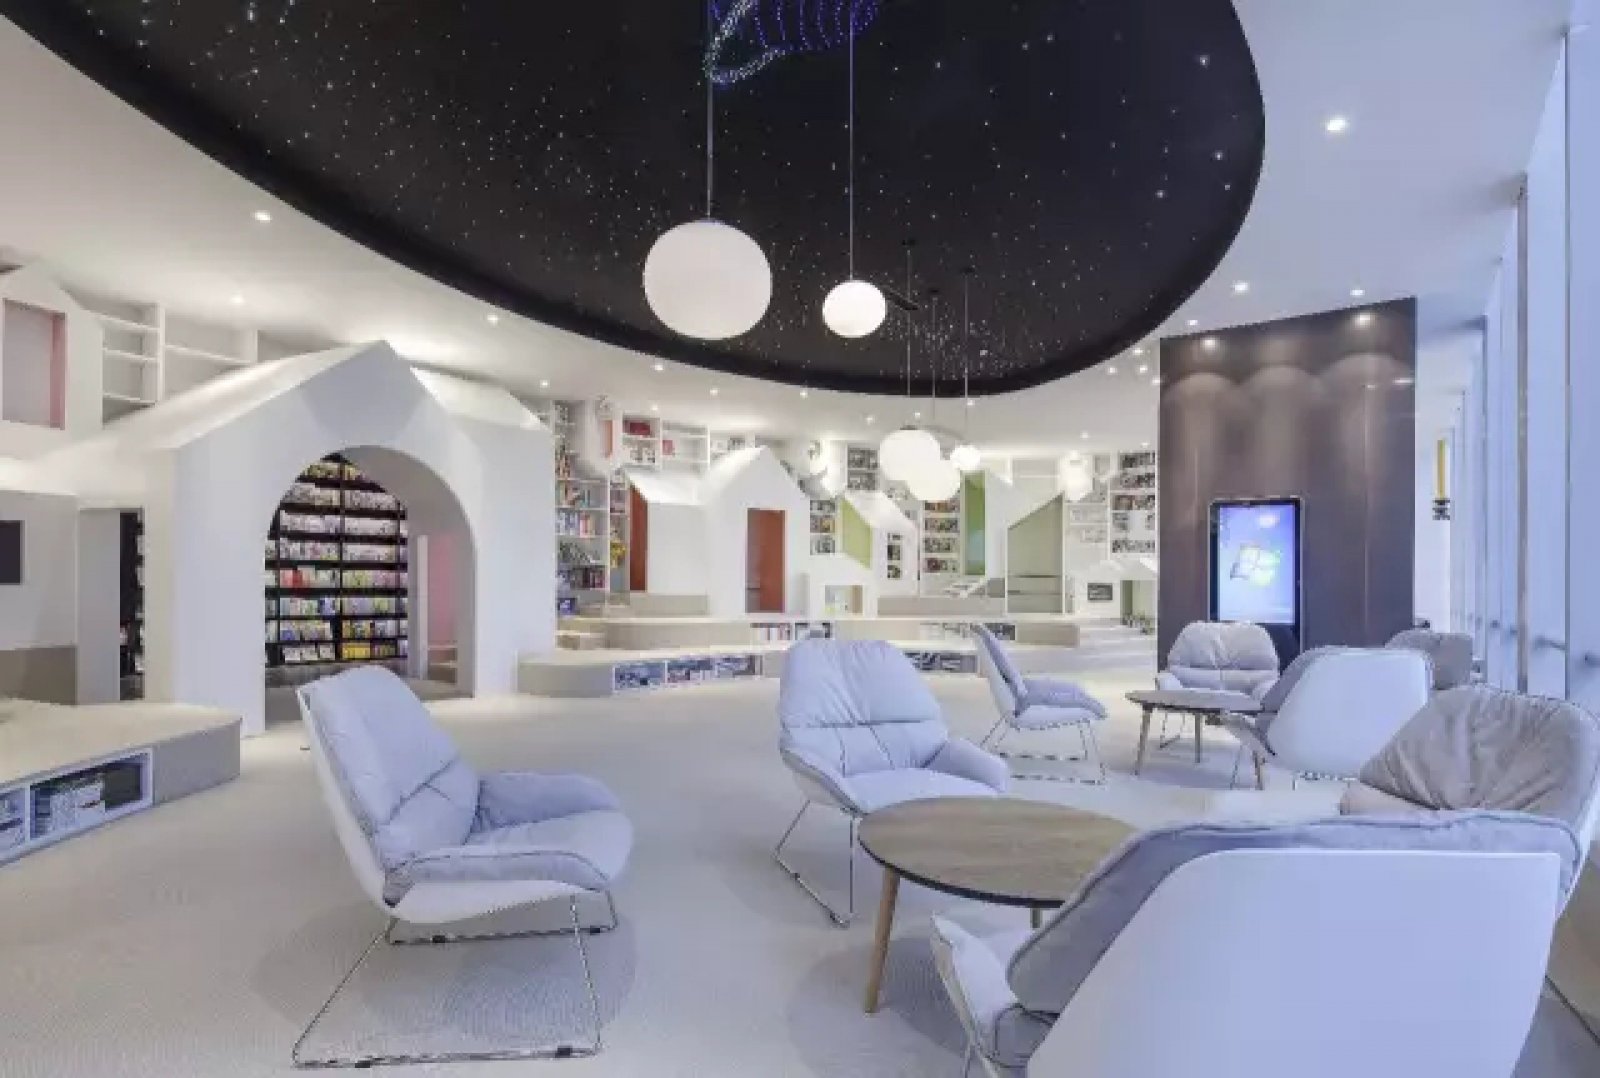 Zhongshu Bookstore has put its new branch in Suzhou into trial operation on September 7. With its one-of-a-kind, exploratory designs, China's Zhongshu bookstore chain extends the voyage of discovery beyond the covers of its stock.